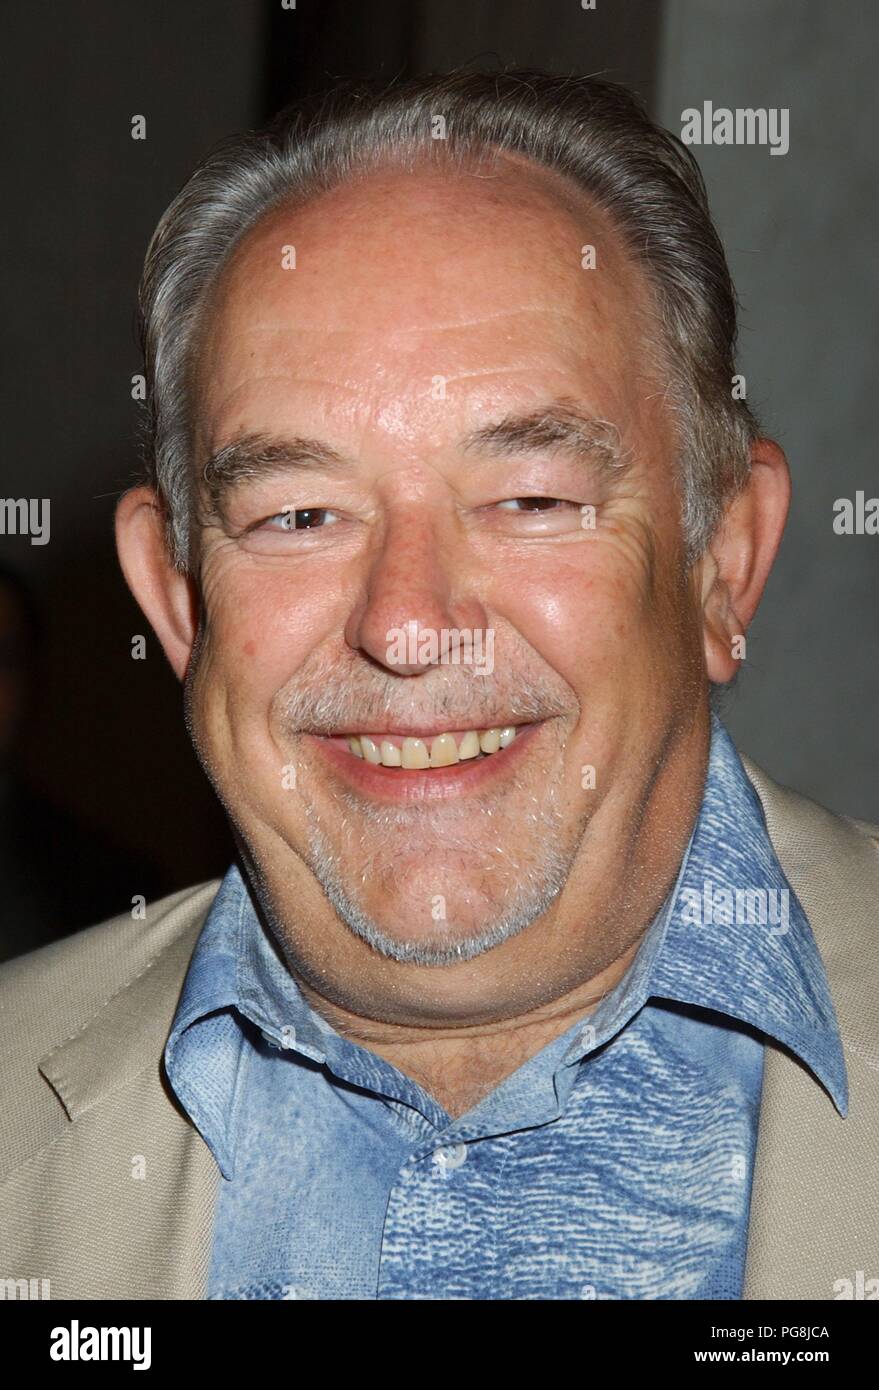 Beverly Hills, California, USA. 5th June, 2004. Actor ROBIN LEACH during the 1st Annual Golden Needle Awards Luncheon and Fashion Show held at the Regent Beverly Wilshire Hotel. Credit: Laura Farr/AdMedia/ZUMA Wire/Alamy Live News Stock Photo